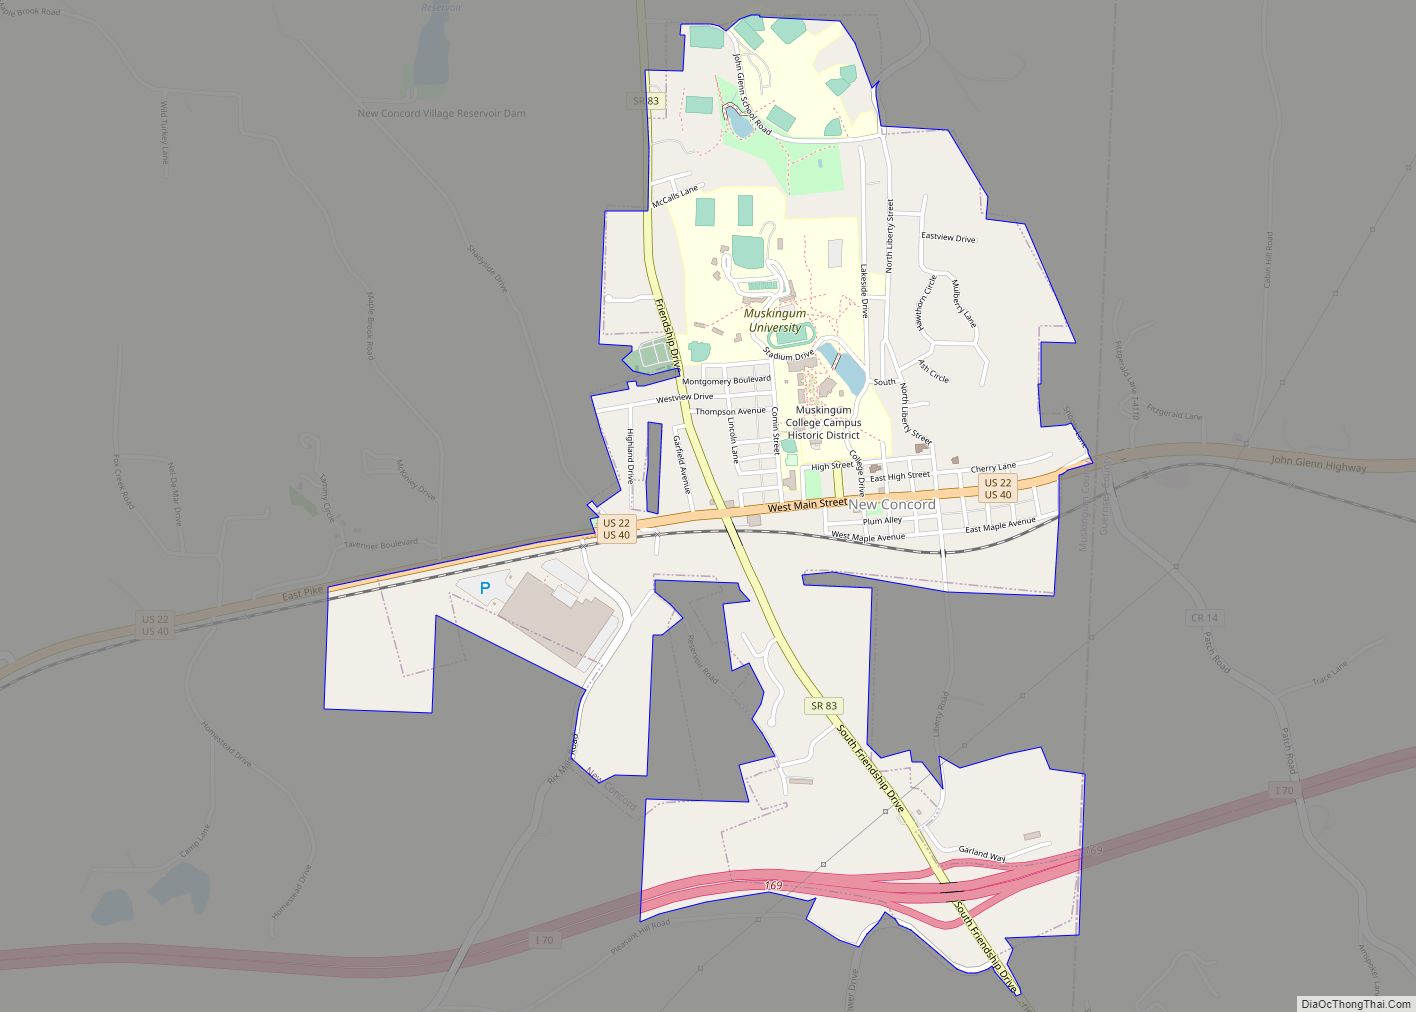 Map of New Concord village